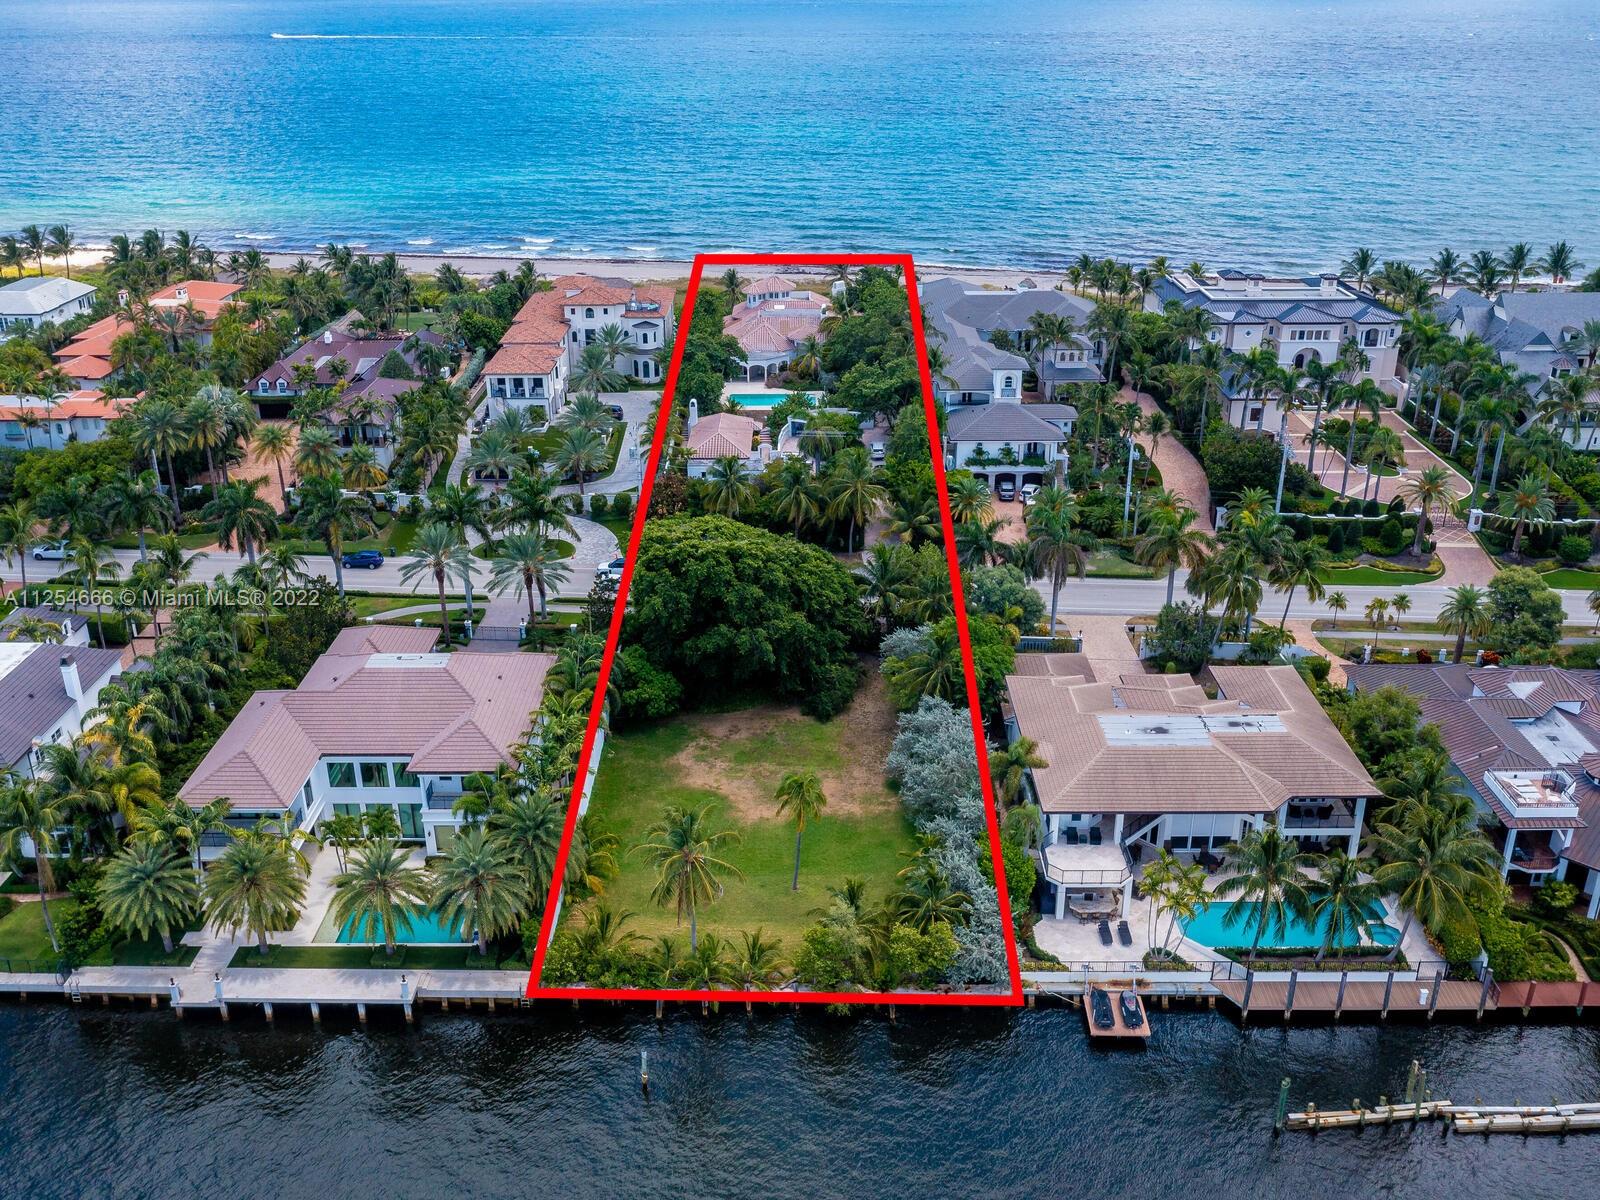 Diamond in the rough! A unique in a lifetime opportunity to own a "dream" in the most desirable an espectacular location; with your own private beach and ocean access on one side and your own private 100 feet of waterline marina on the other one, a glimpse to the heart unifying both worlds in one.